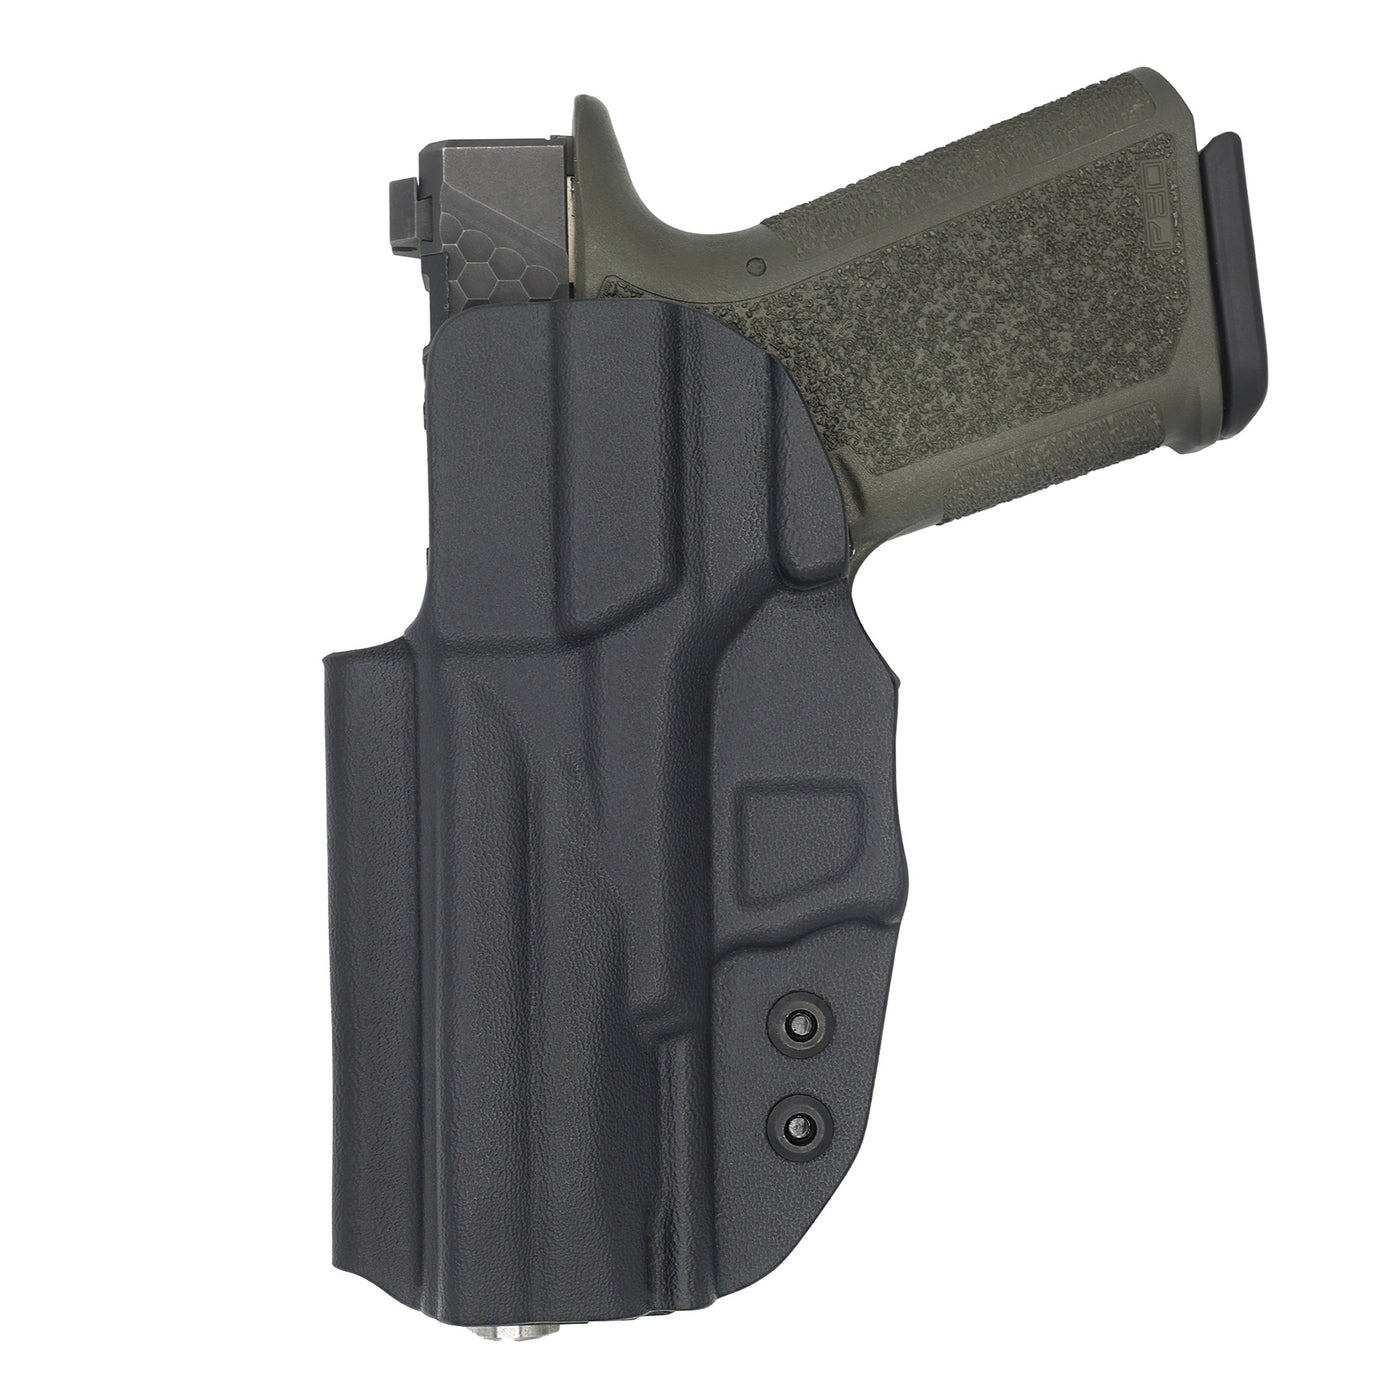 This is the rear of the quickship C&G Holsters inside the waistband holster for the Poly80 PF940c in holstered position